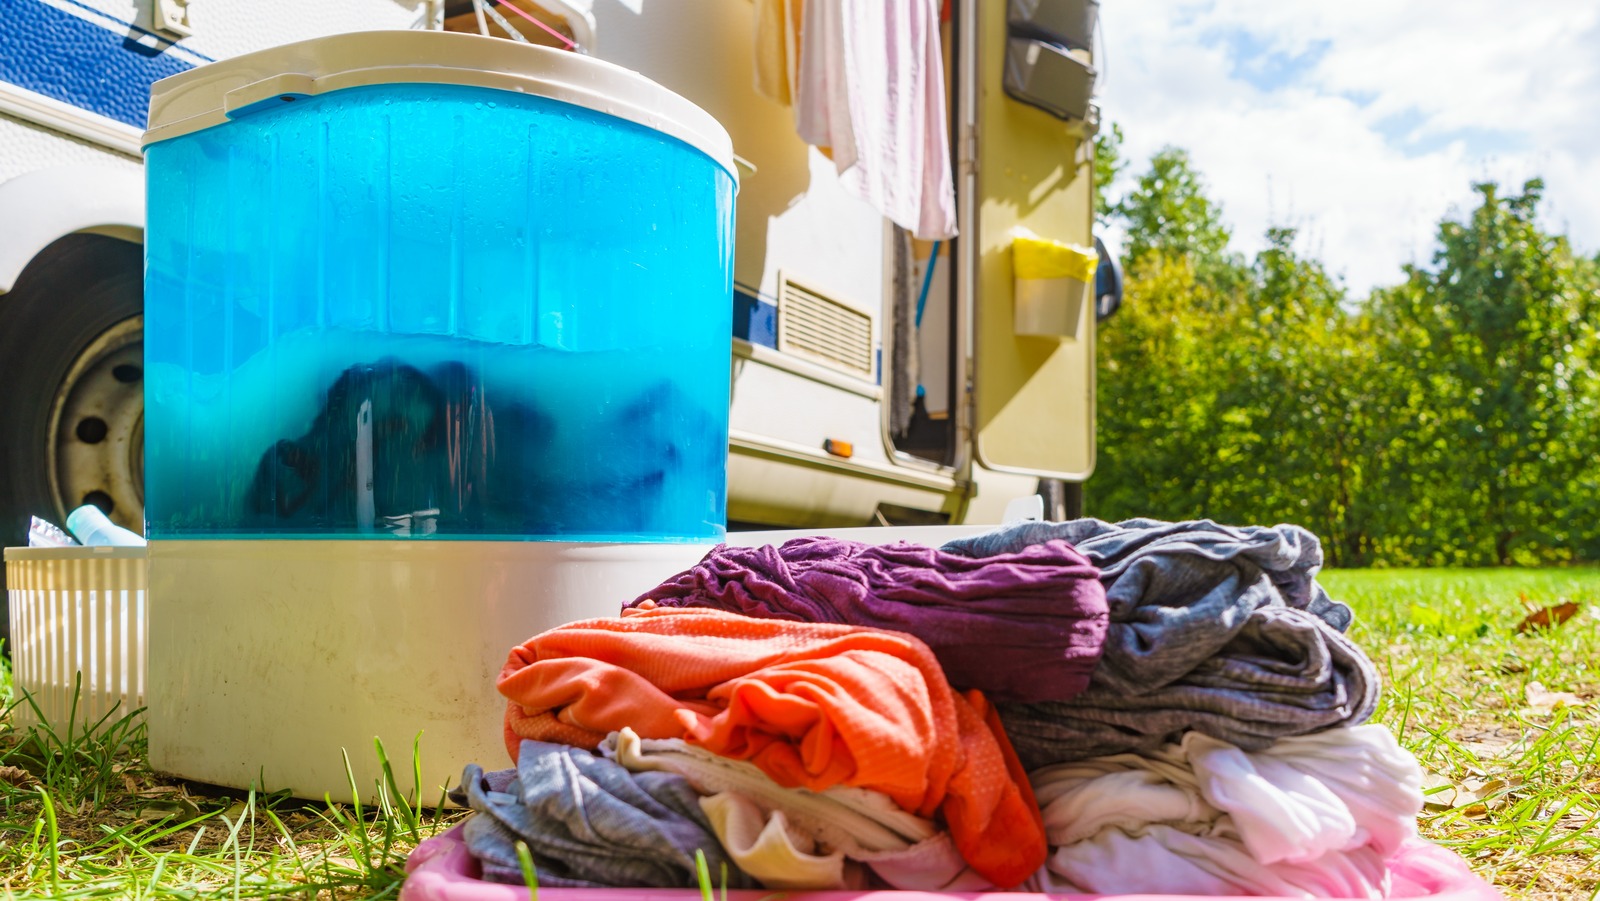 6 Of The Highest Rated Portable Washing Machines For Under $200